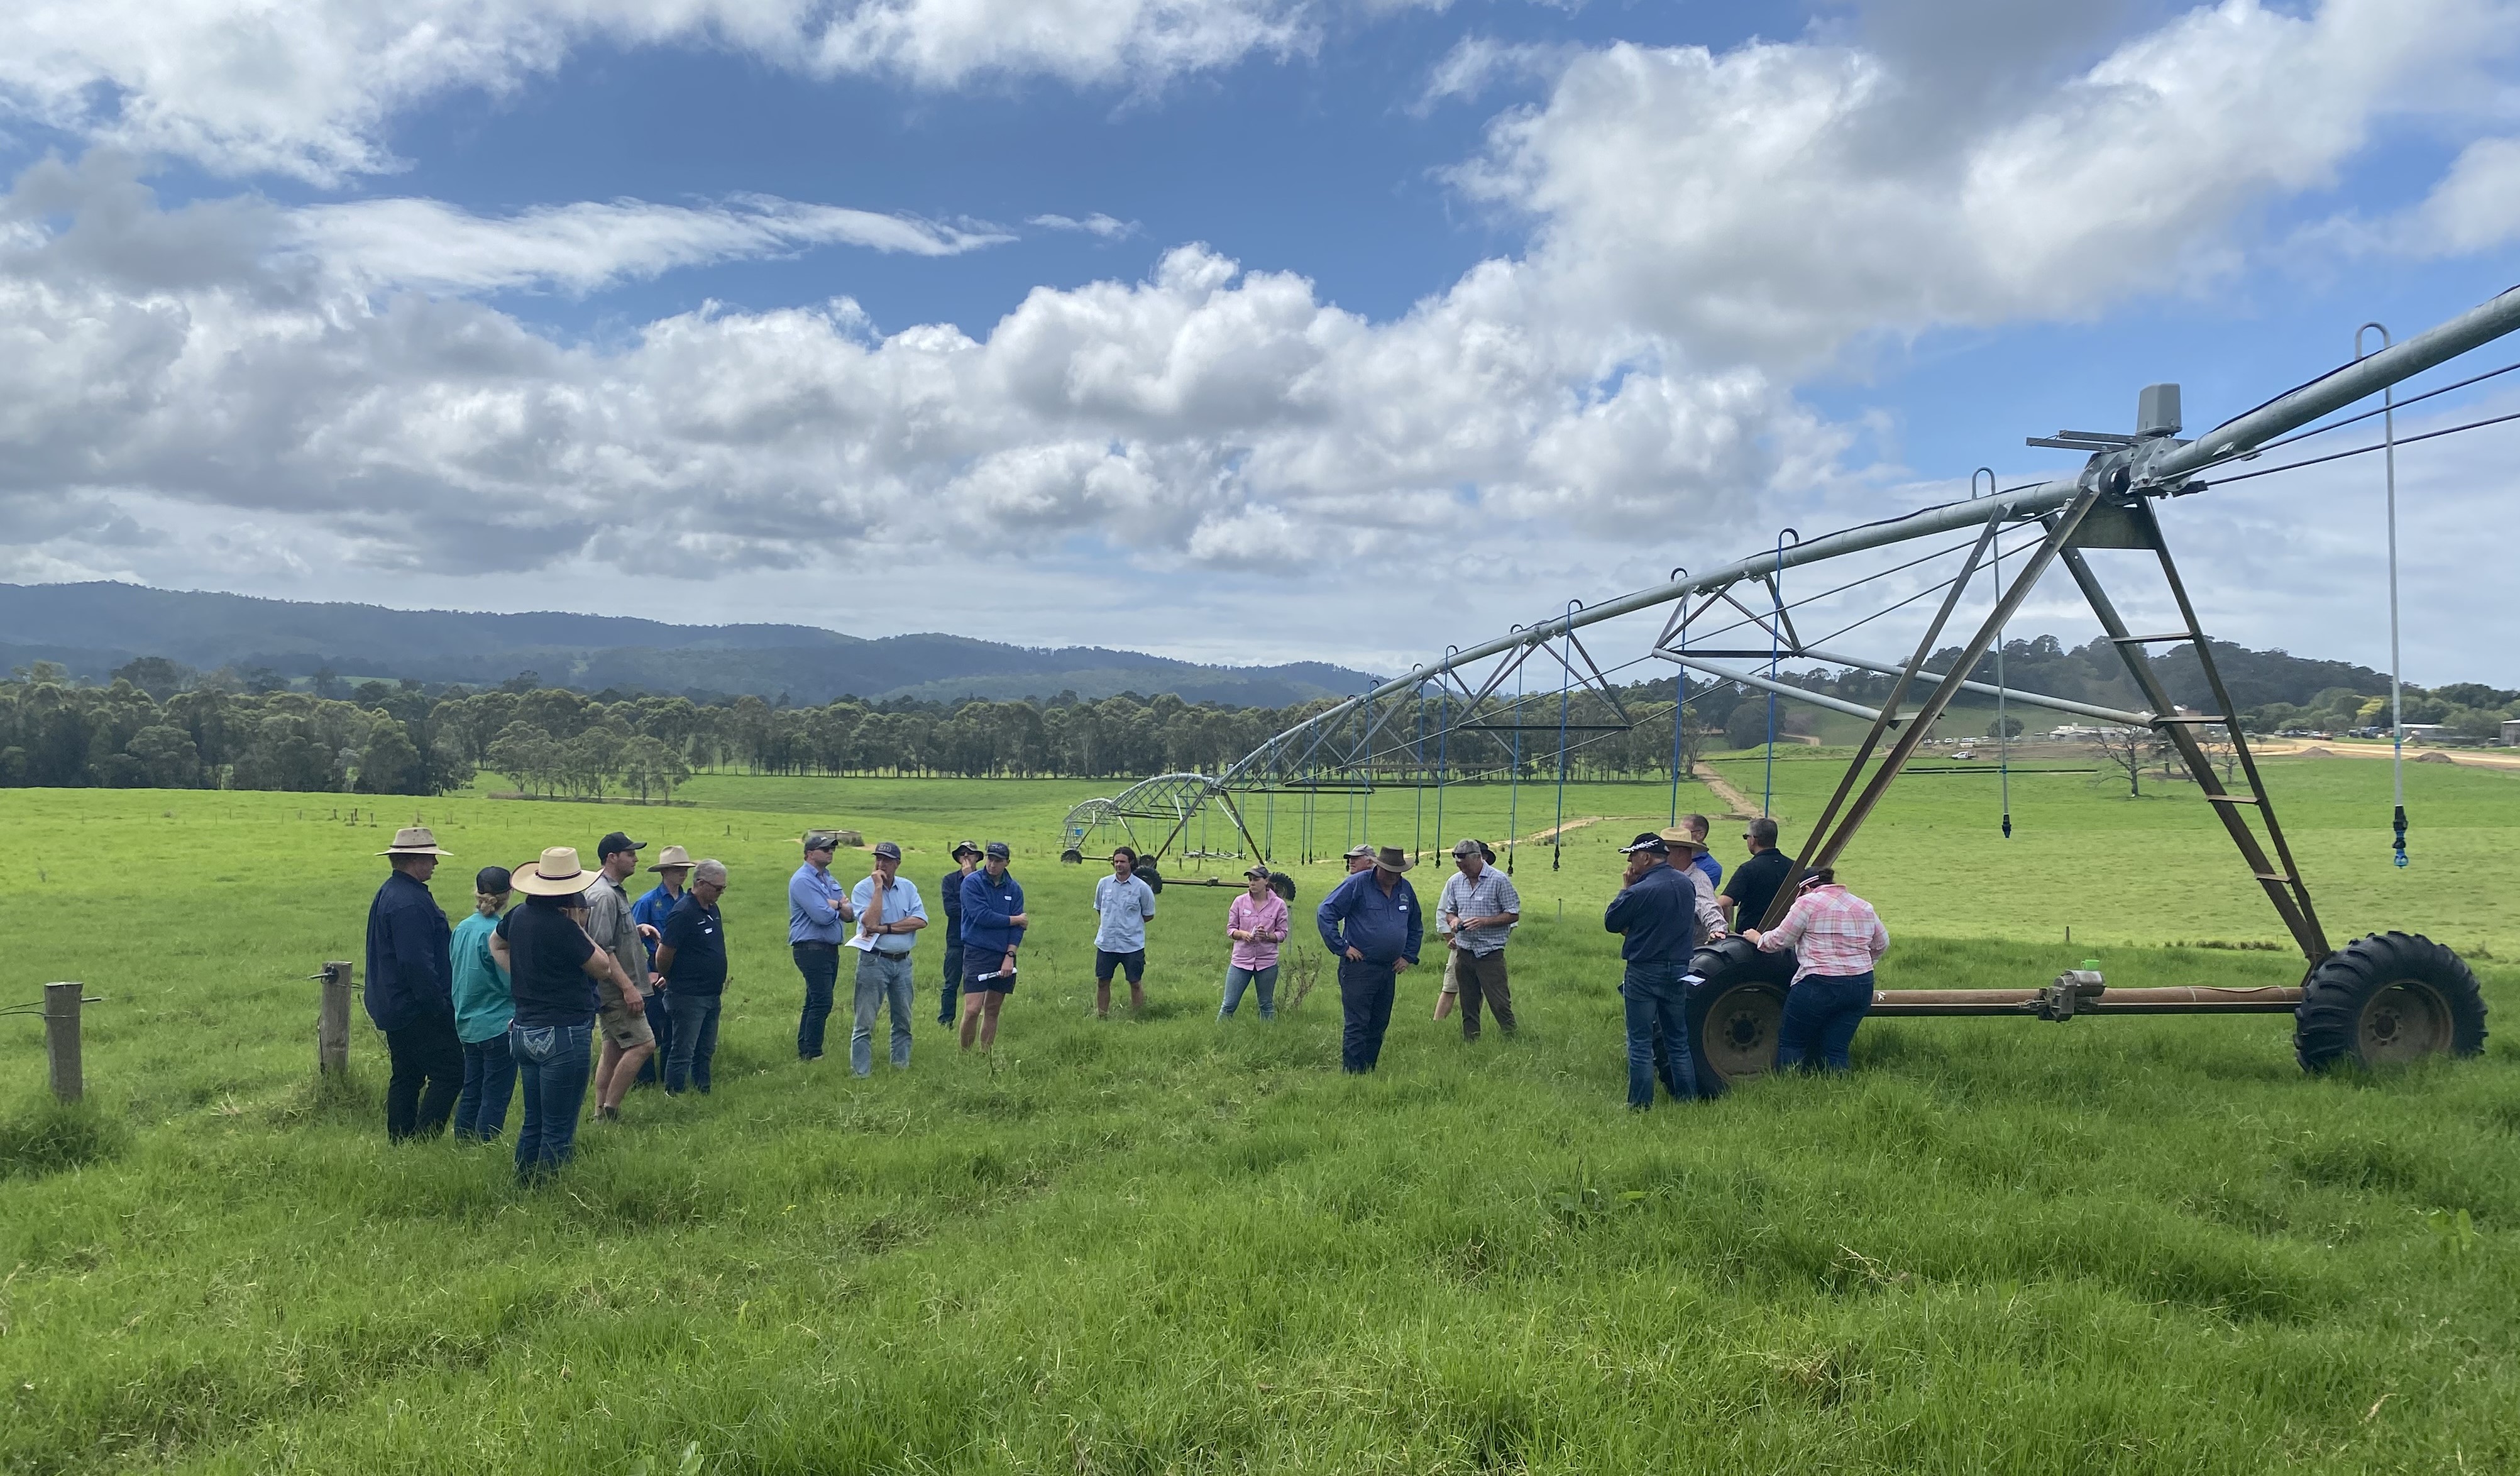 About 20 field day participants inspect a large pivot irrigation machine in a lush grassy paddock.